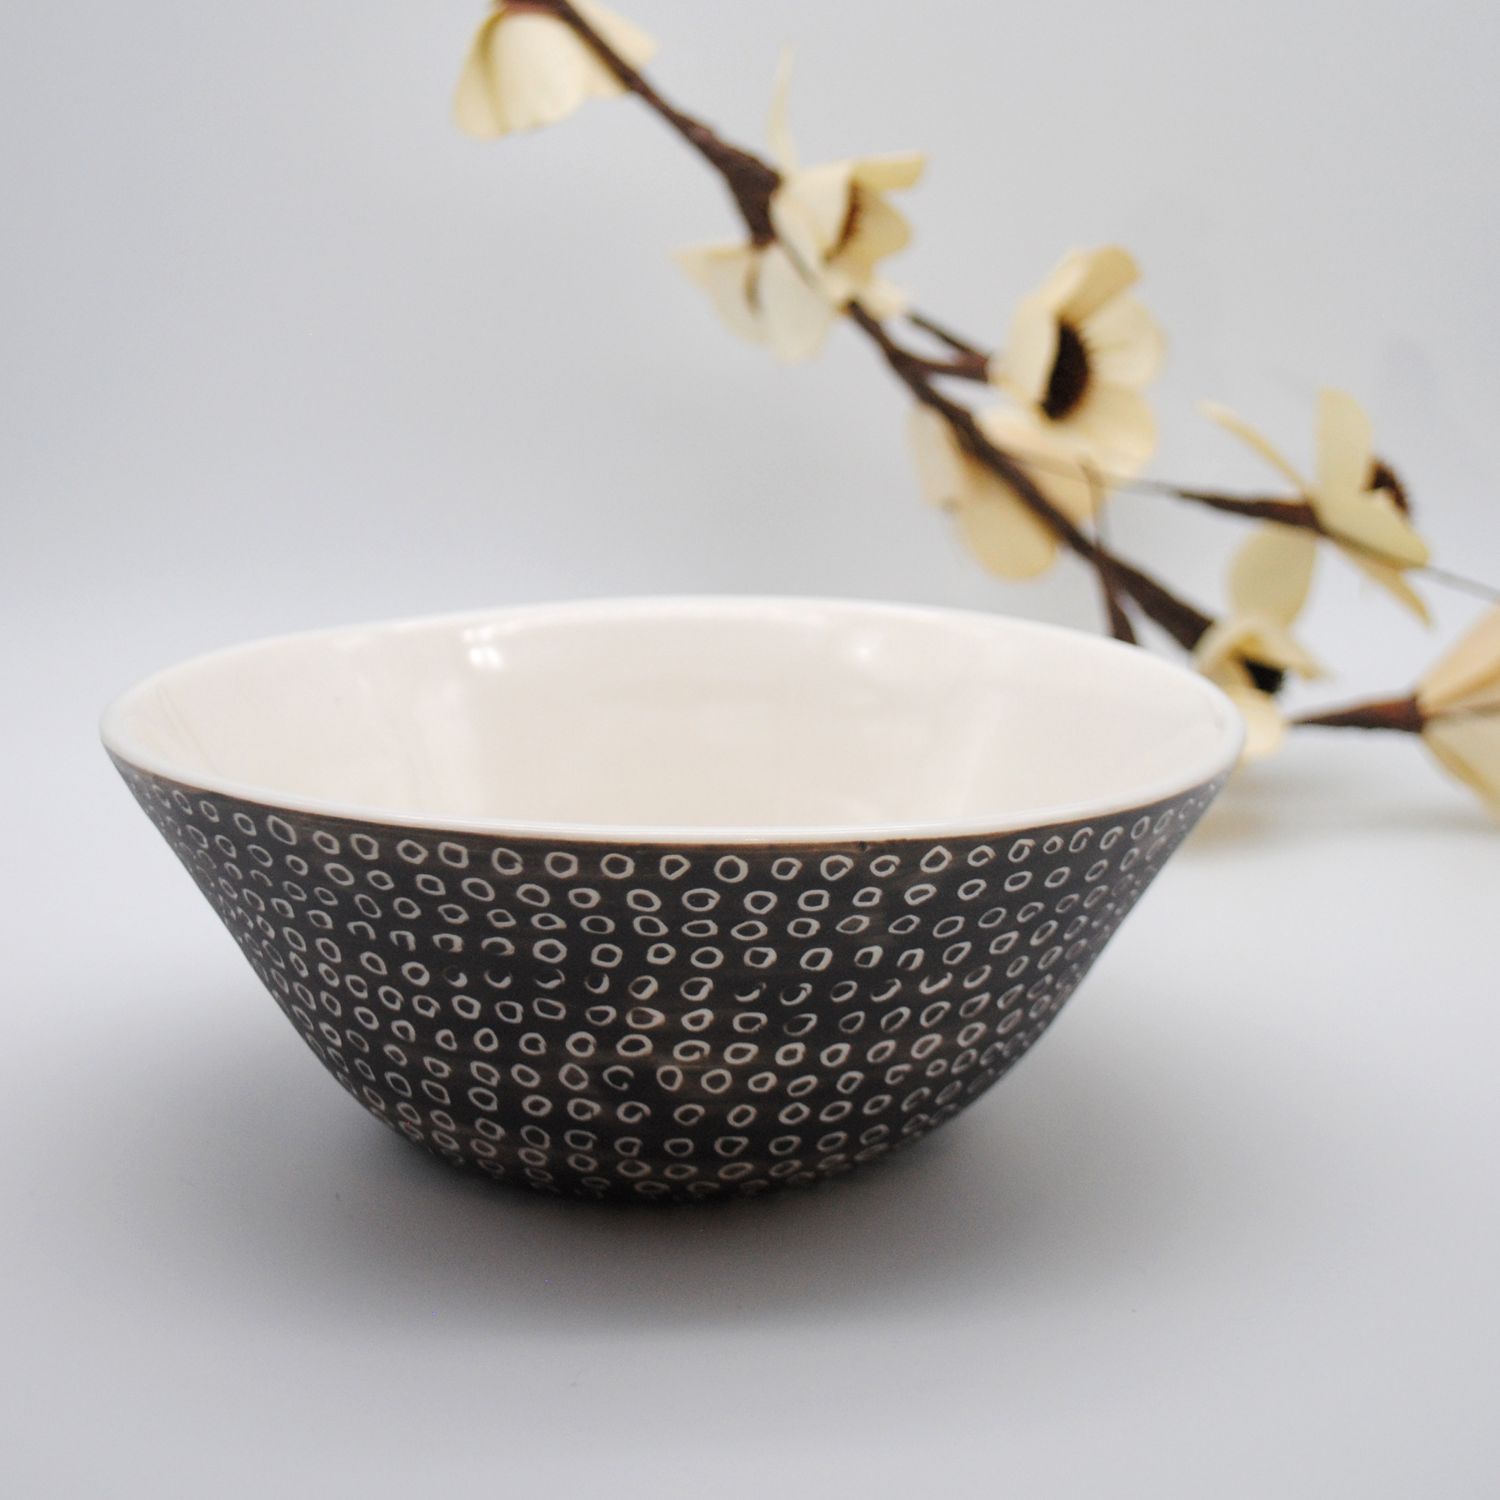 Cuir Ceramics: Black and White Bowl Product Image 1 of 5